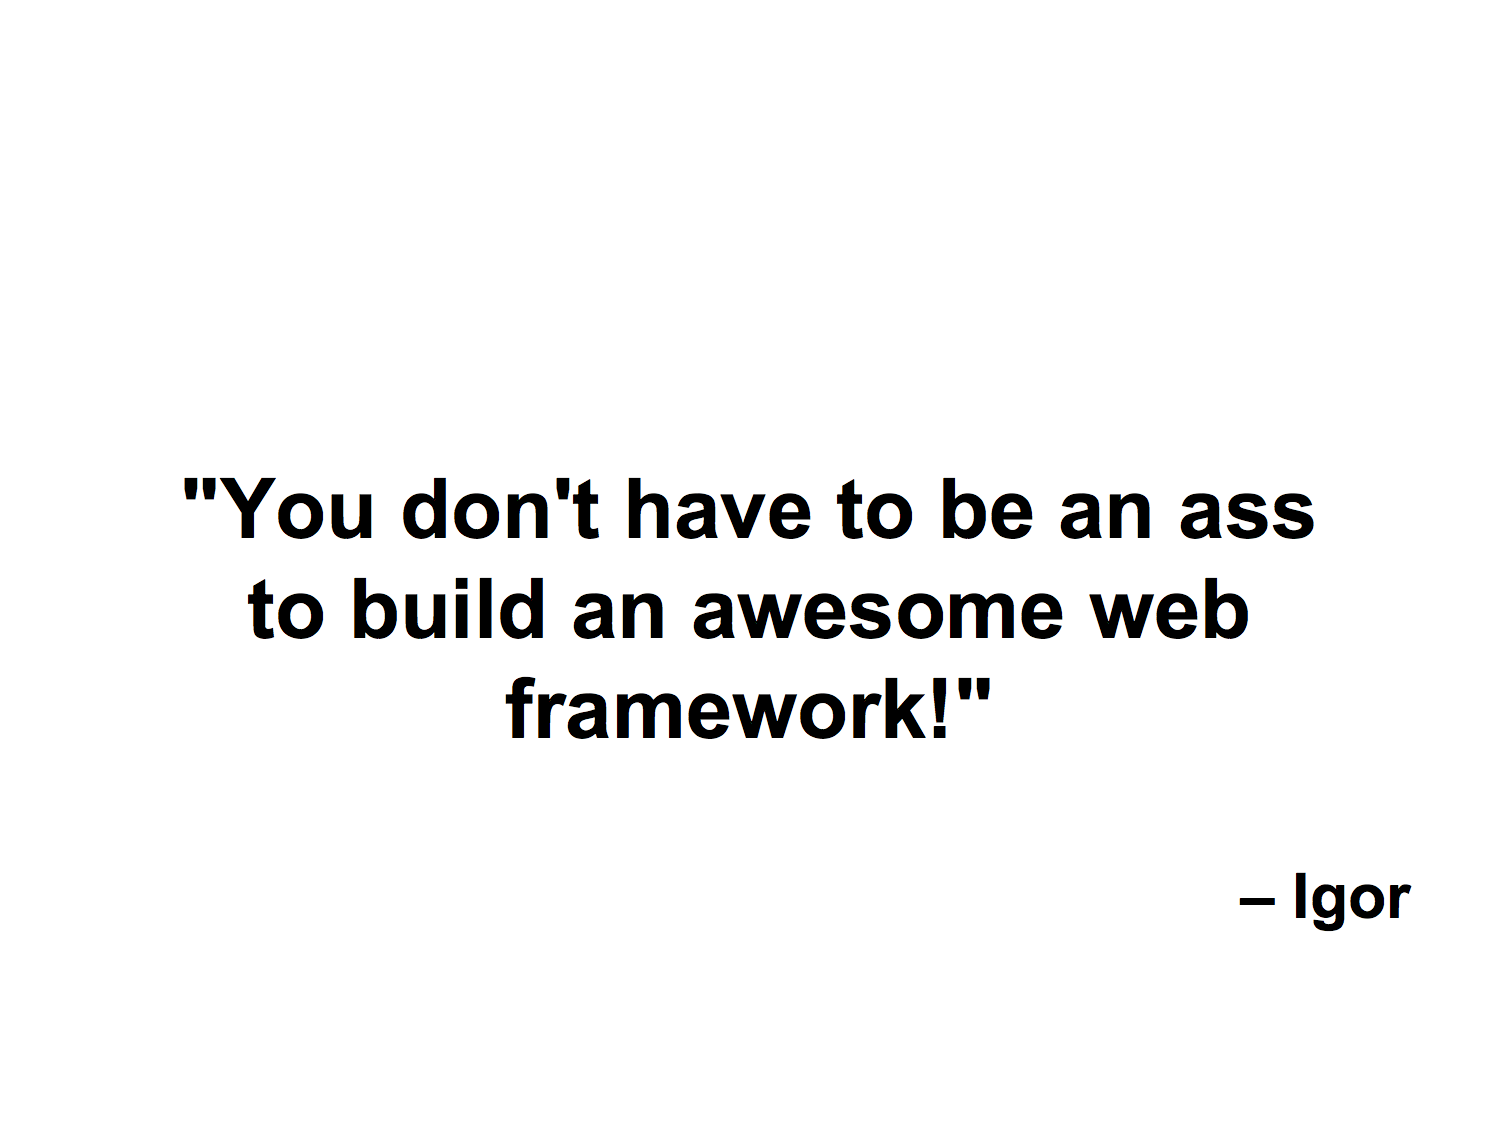 Quote: You don't have to be an ass to build an awesome web framework!